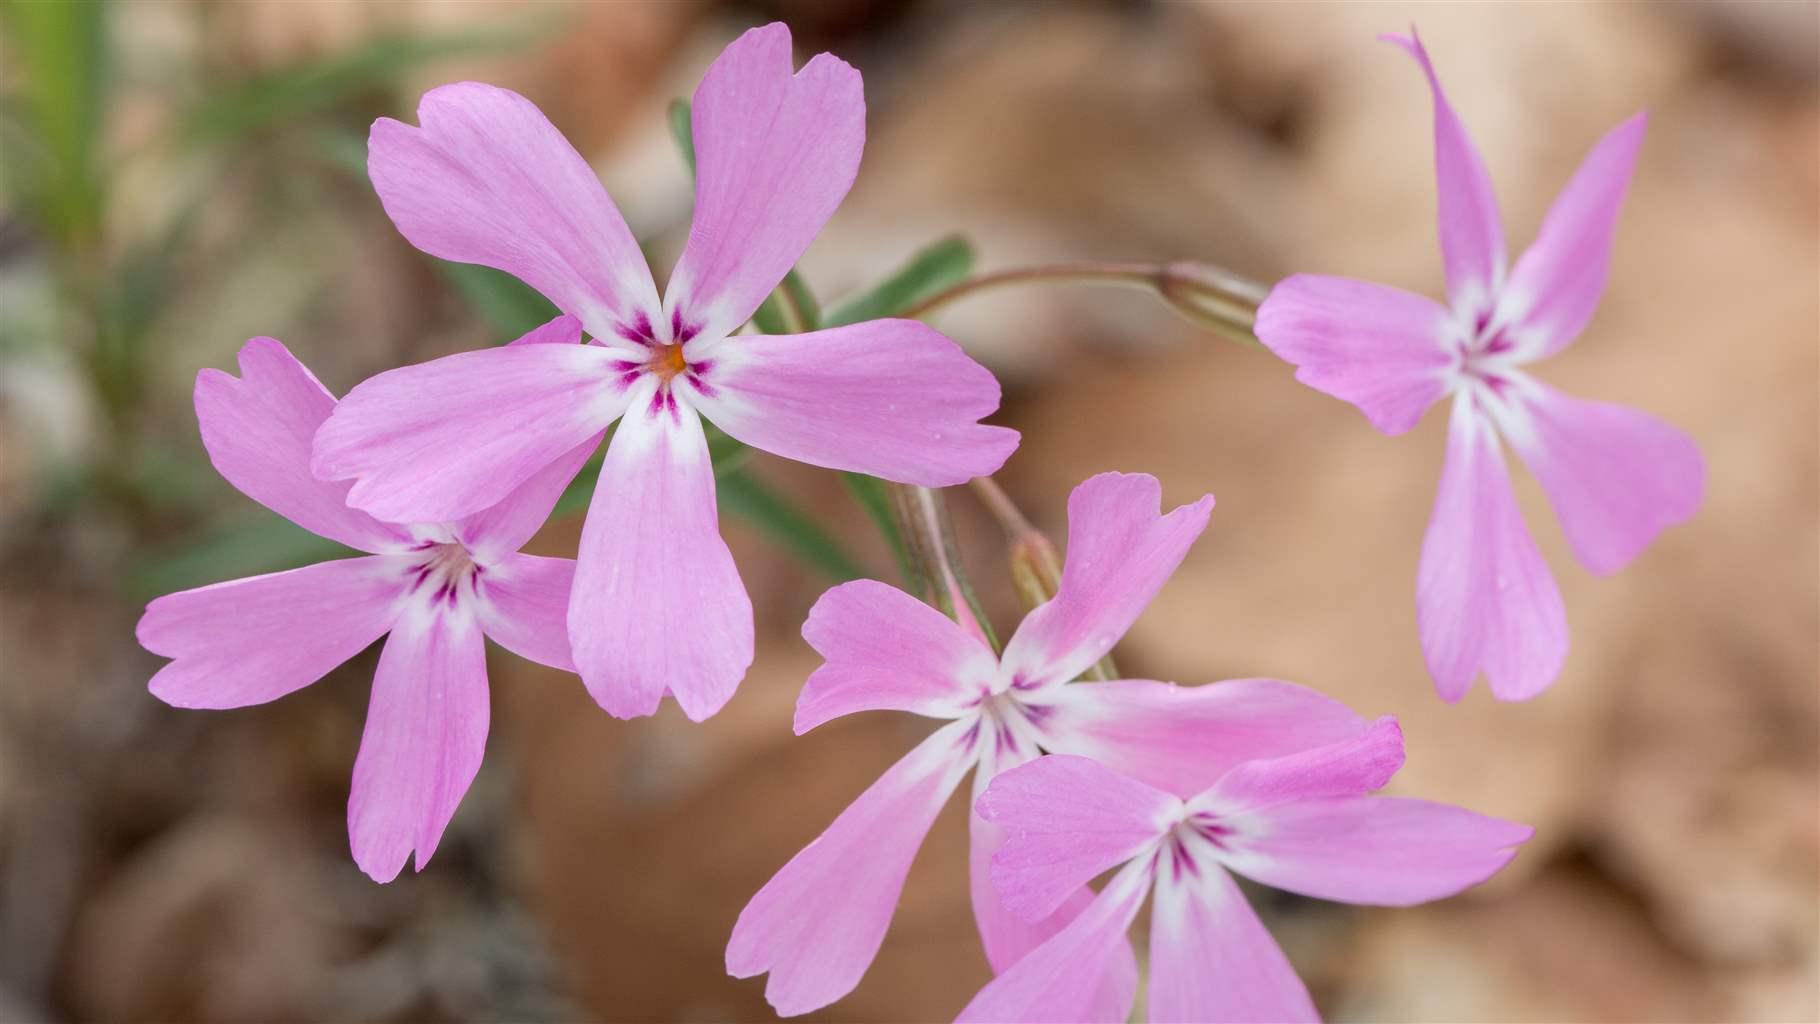 The pink flowers of a showy phlox bloom in the Shasta-Trinity National Forest in California.